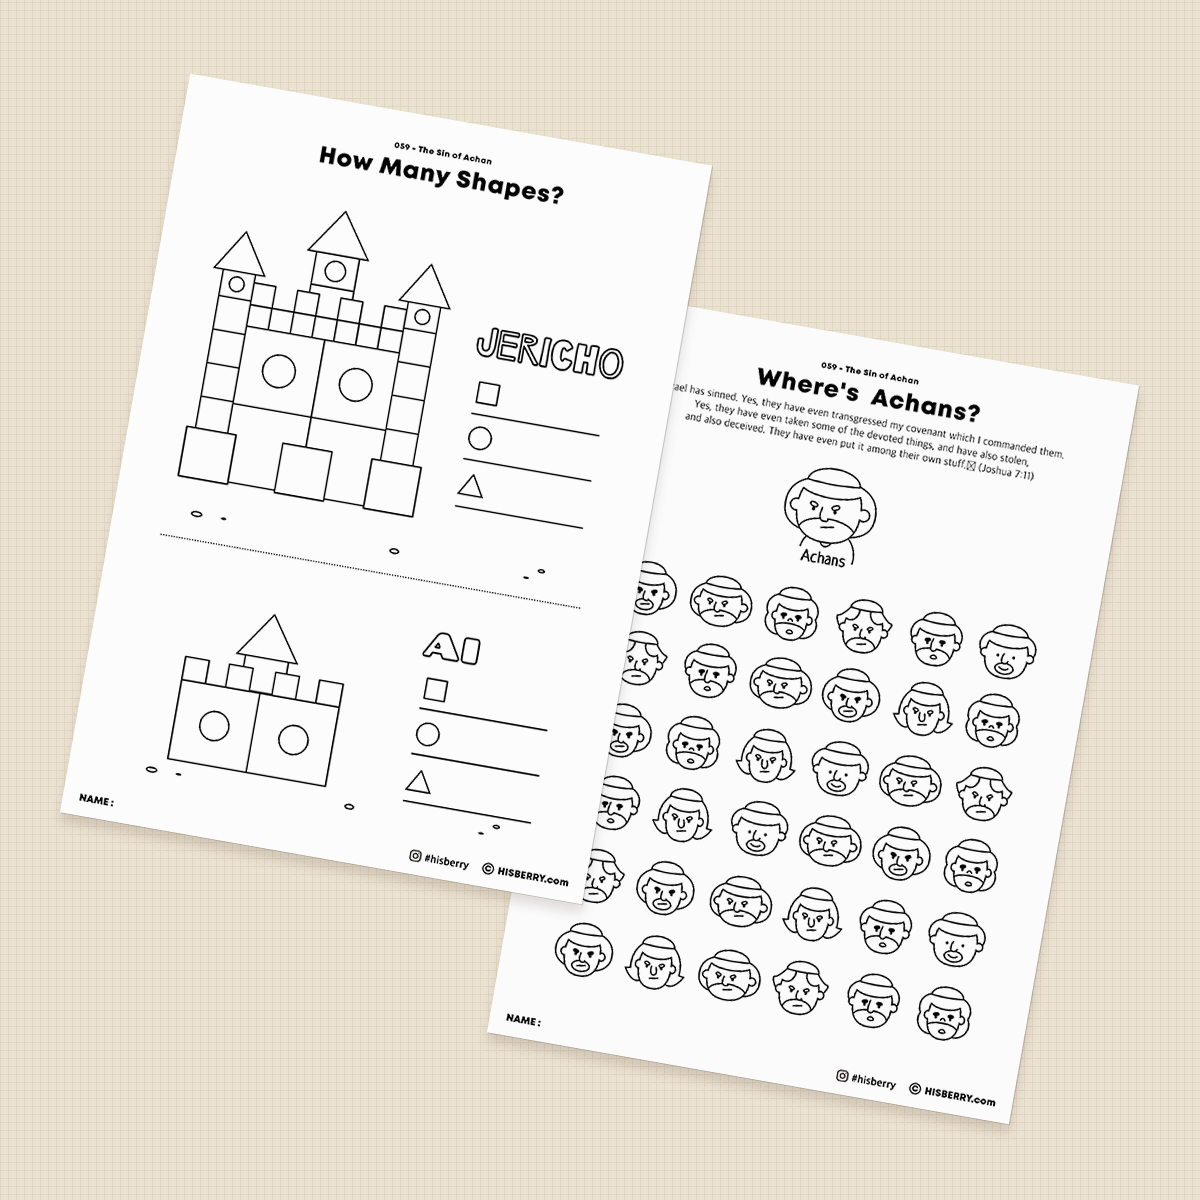 The-Sin-of-Achan-Bible-Activity-Printables-worksheet